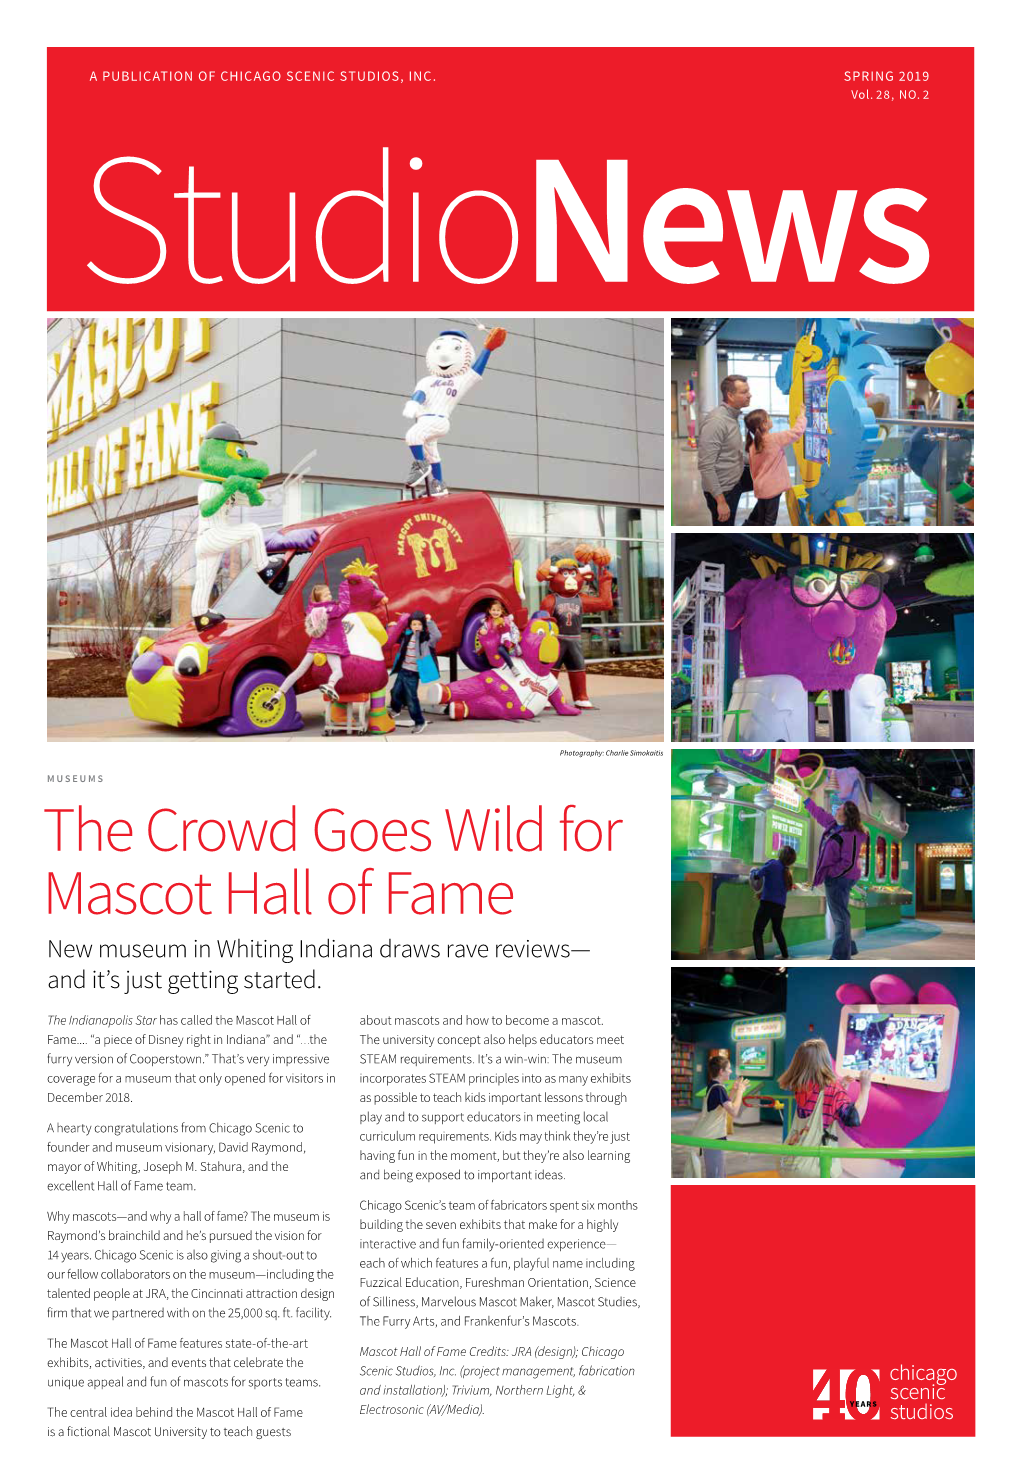 The Crowd Goes Wild for Mascot Hall of Fame New Museum in Whiting Indiana Draws Rave Reviews— and It’S Just Getting Started